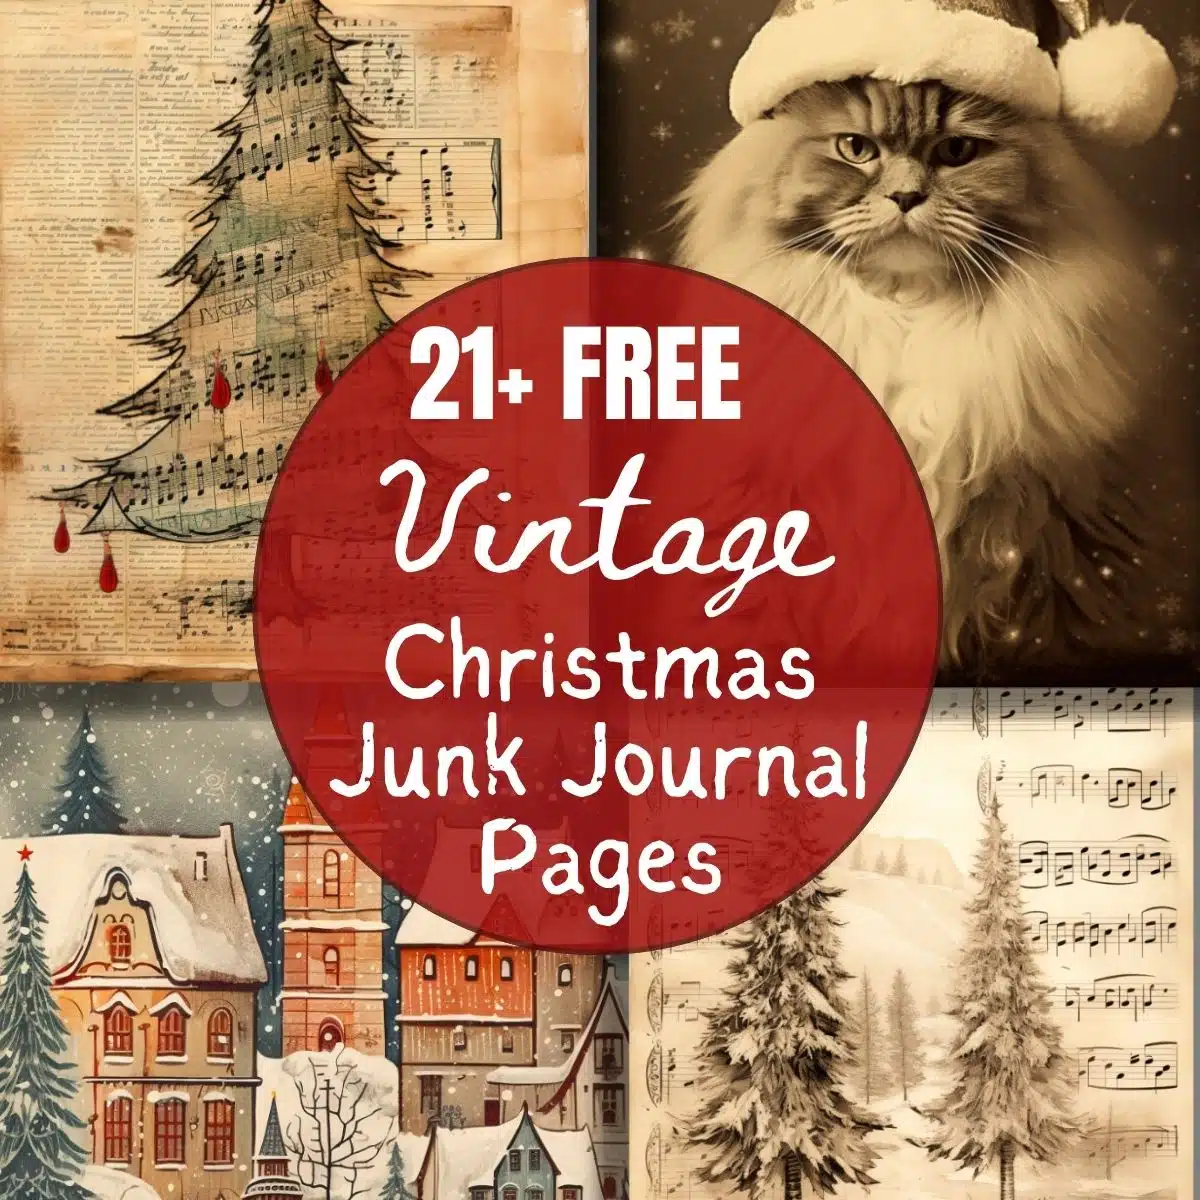 22 Junk Journal Supplies You Can't Miss: Transform Your Crafting